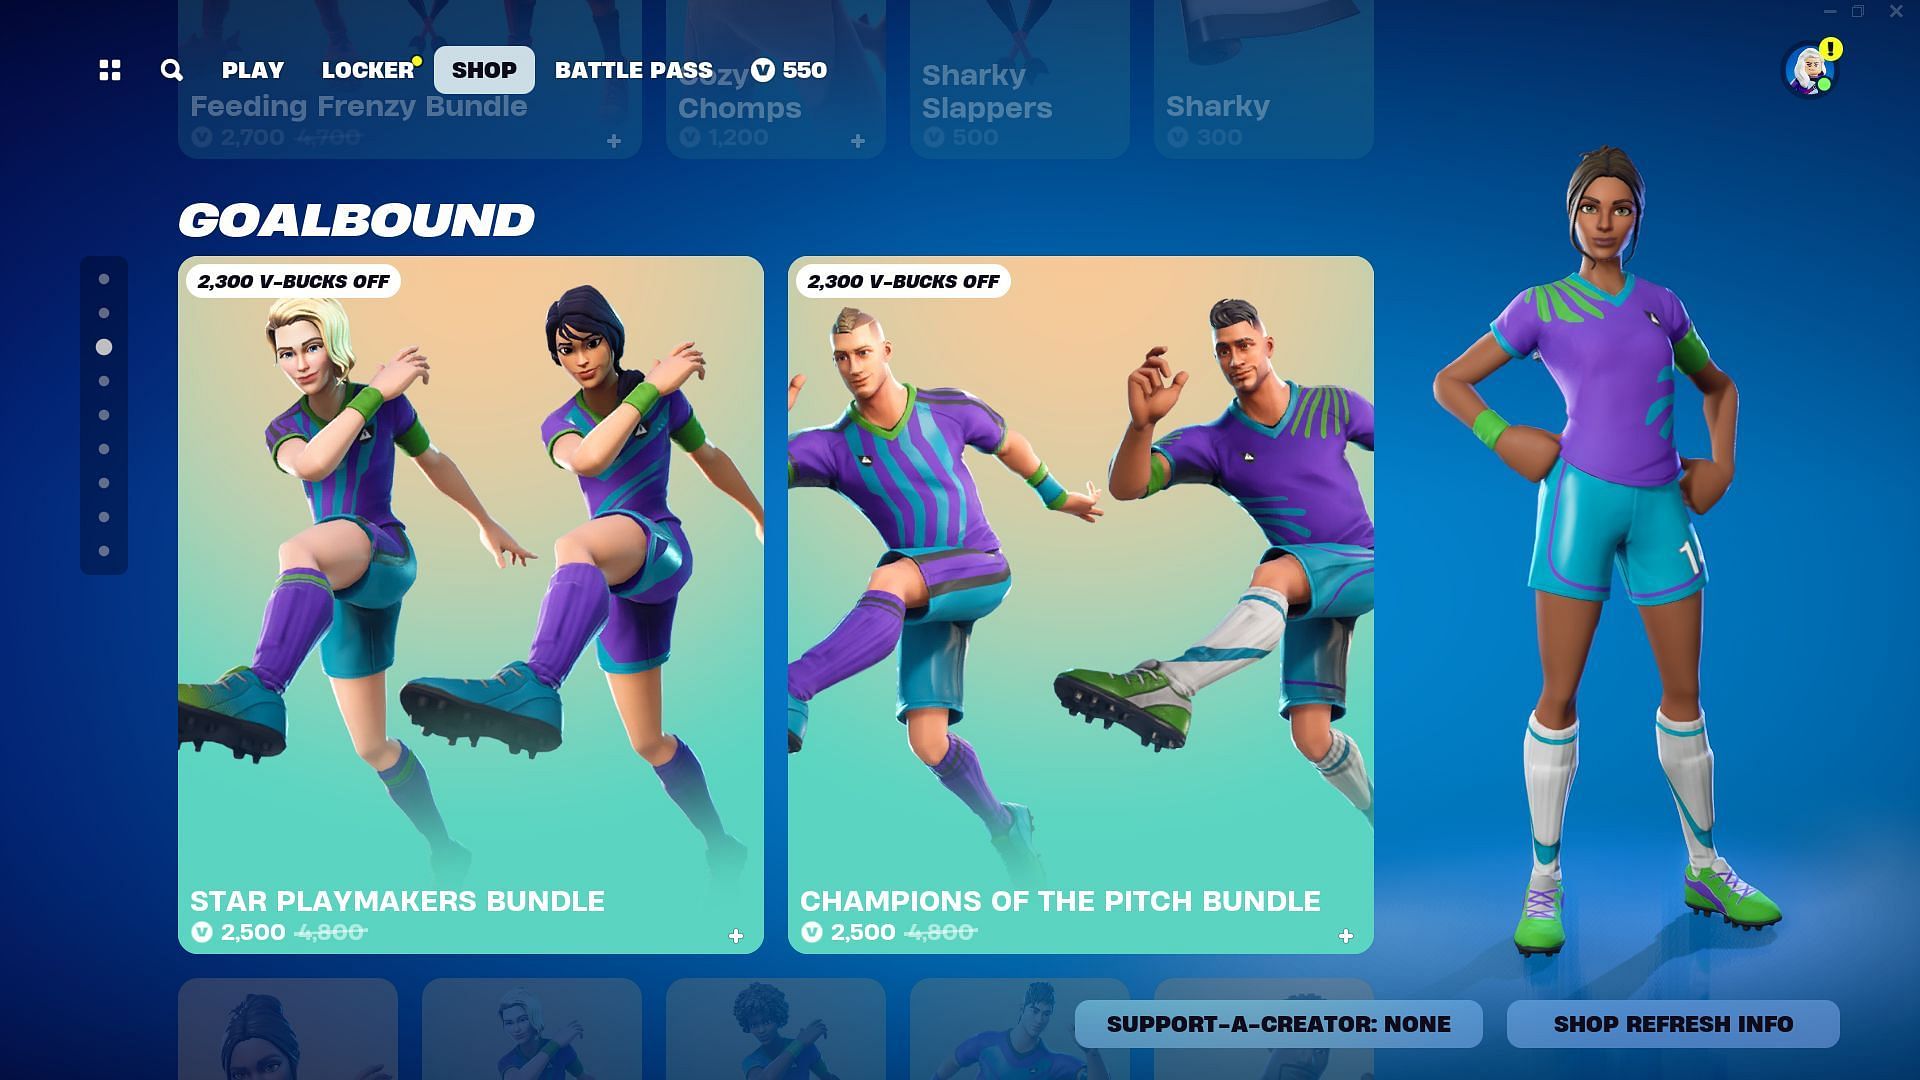 You can now purchase the Star Playmakers Bundle in Fortnite (Image via Epic Games)